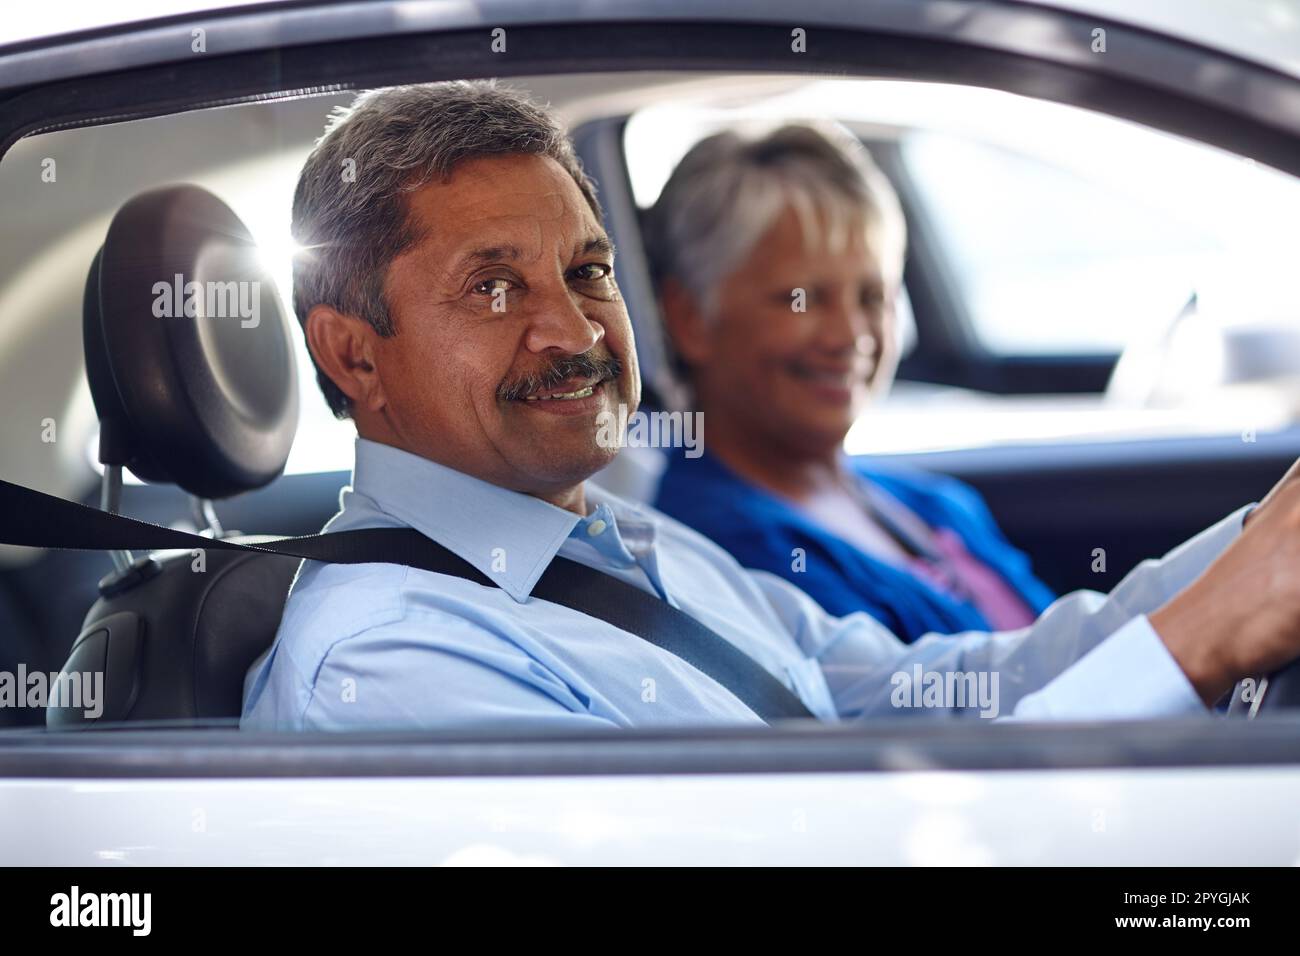 On the road to a happy retirement. a senior couple going for a drive together in a car. Stock Photo